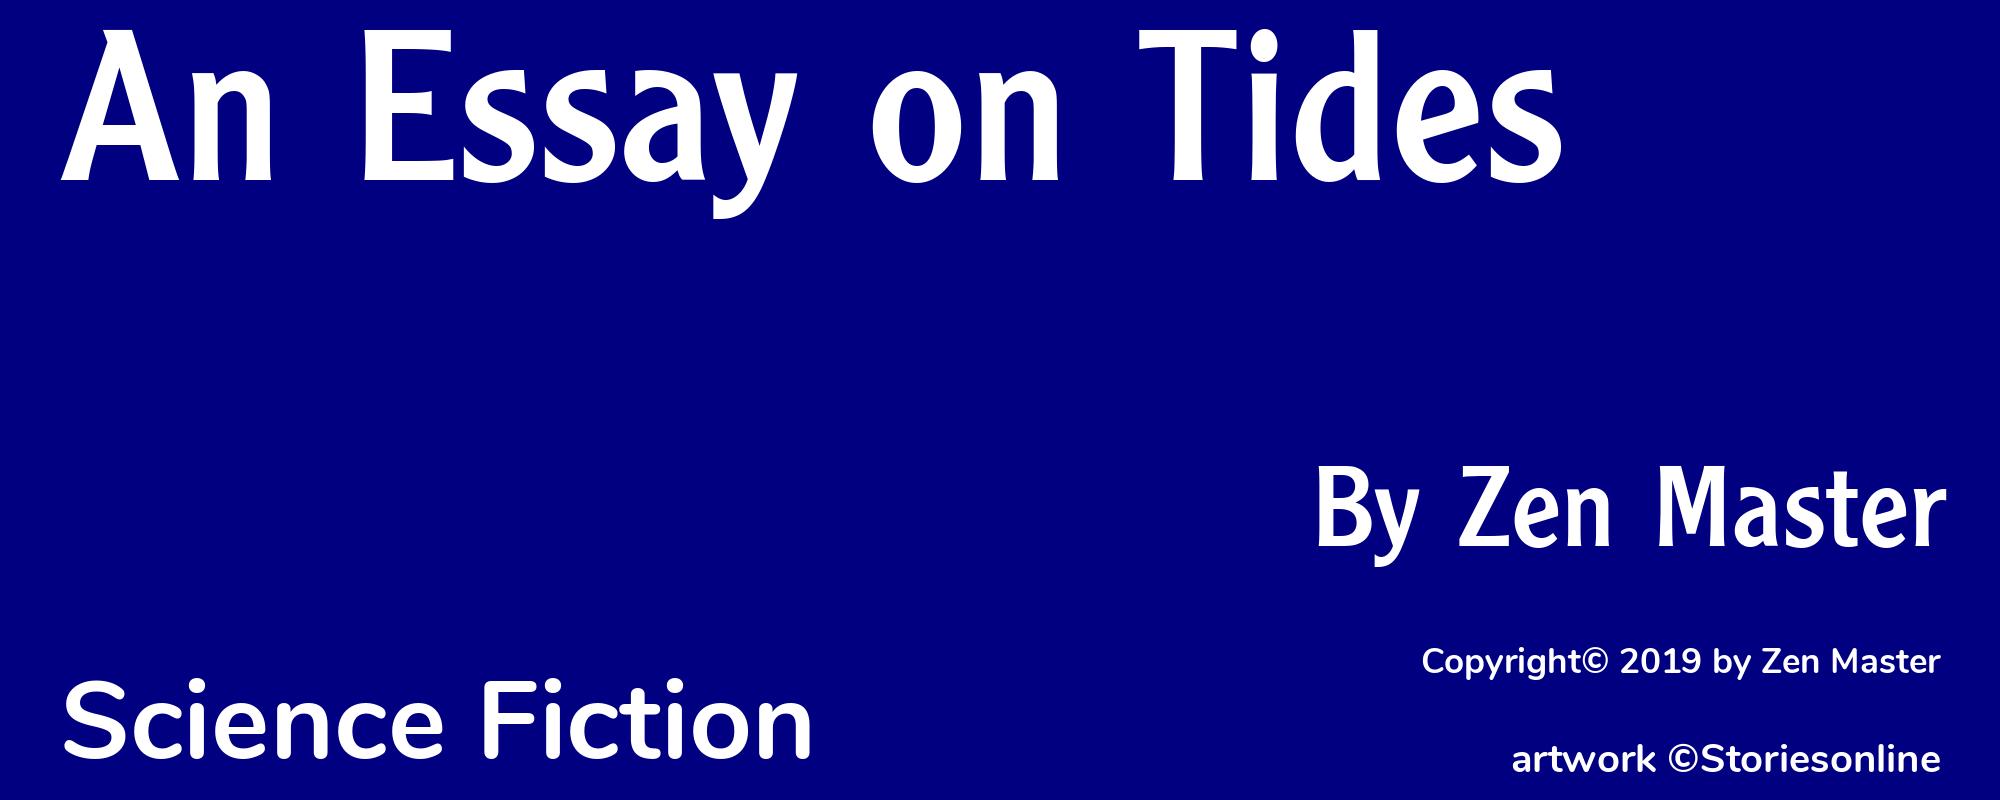 An Essay on Tides - Cover